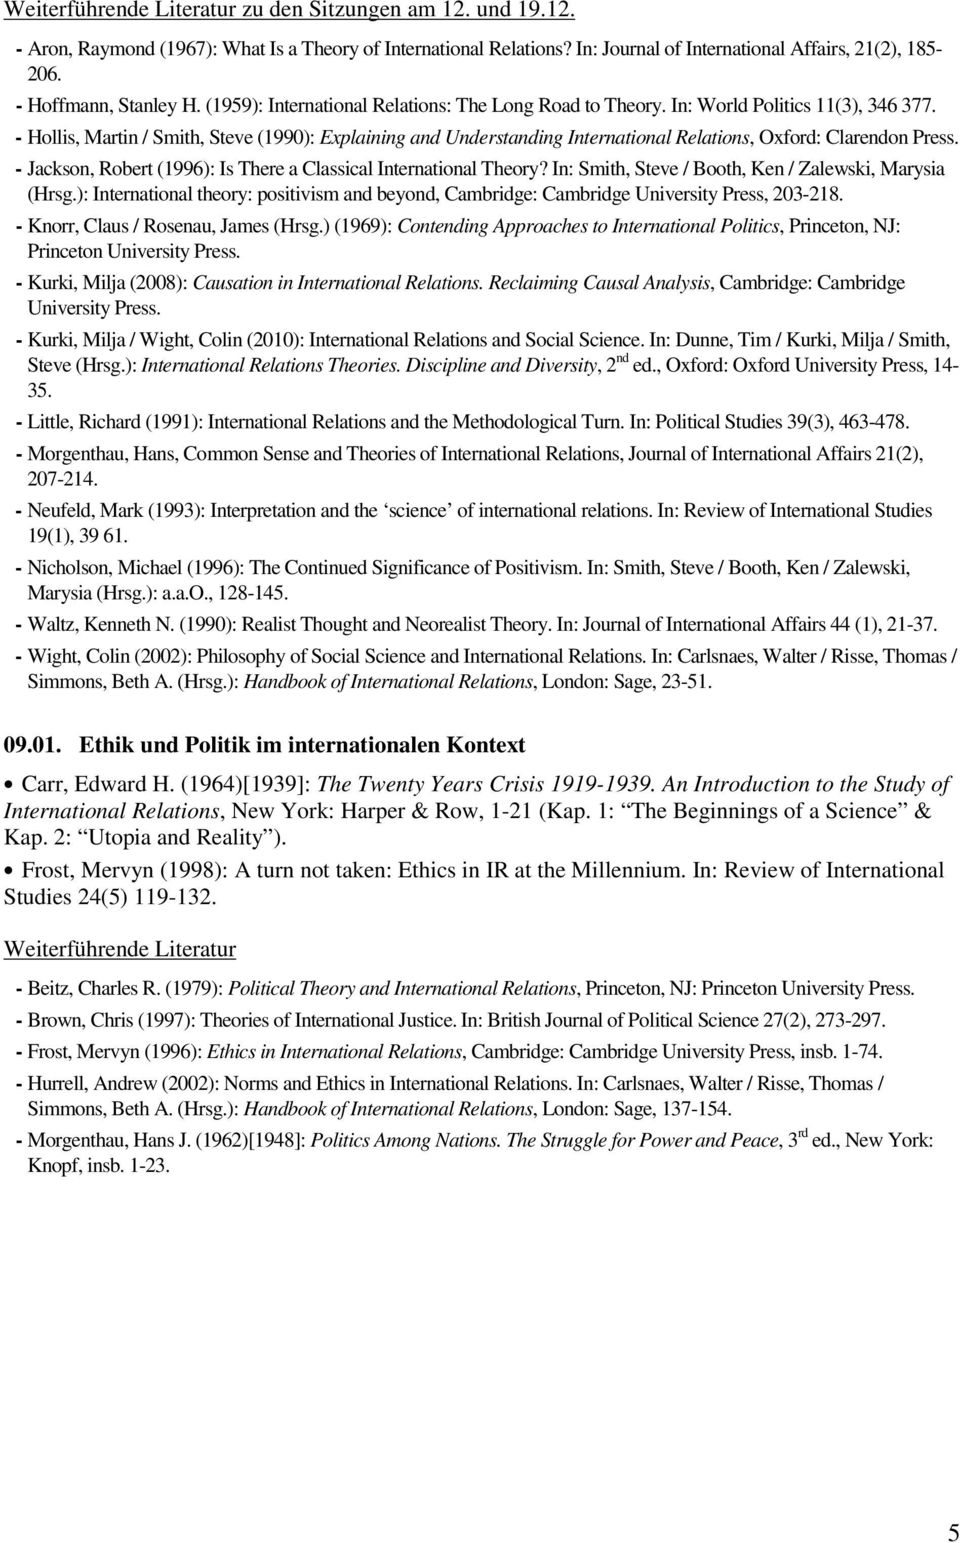 - Hollis, Martin / Smith, Steve (1990): Explaining and Understanding International Relations, Oxford: Clarendon Press. - Jackson, Robert (1996): Is There a Classical International Theory?